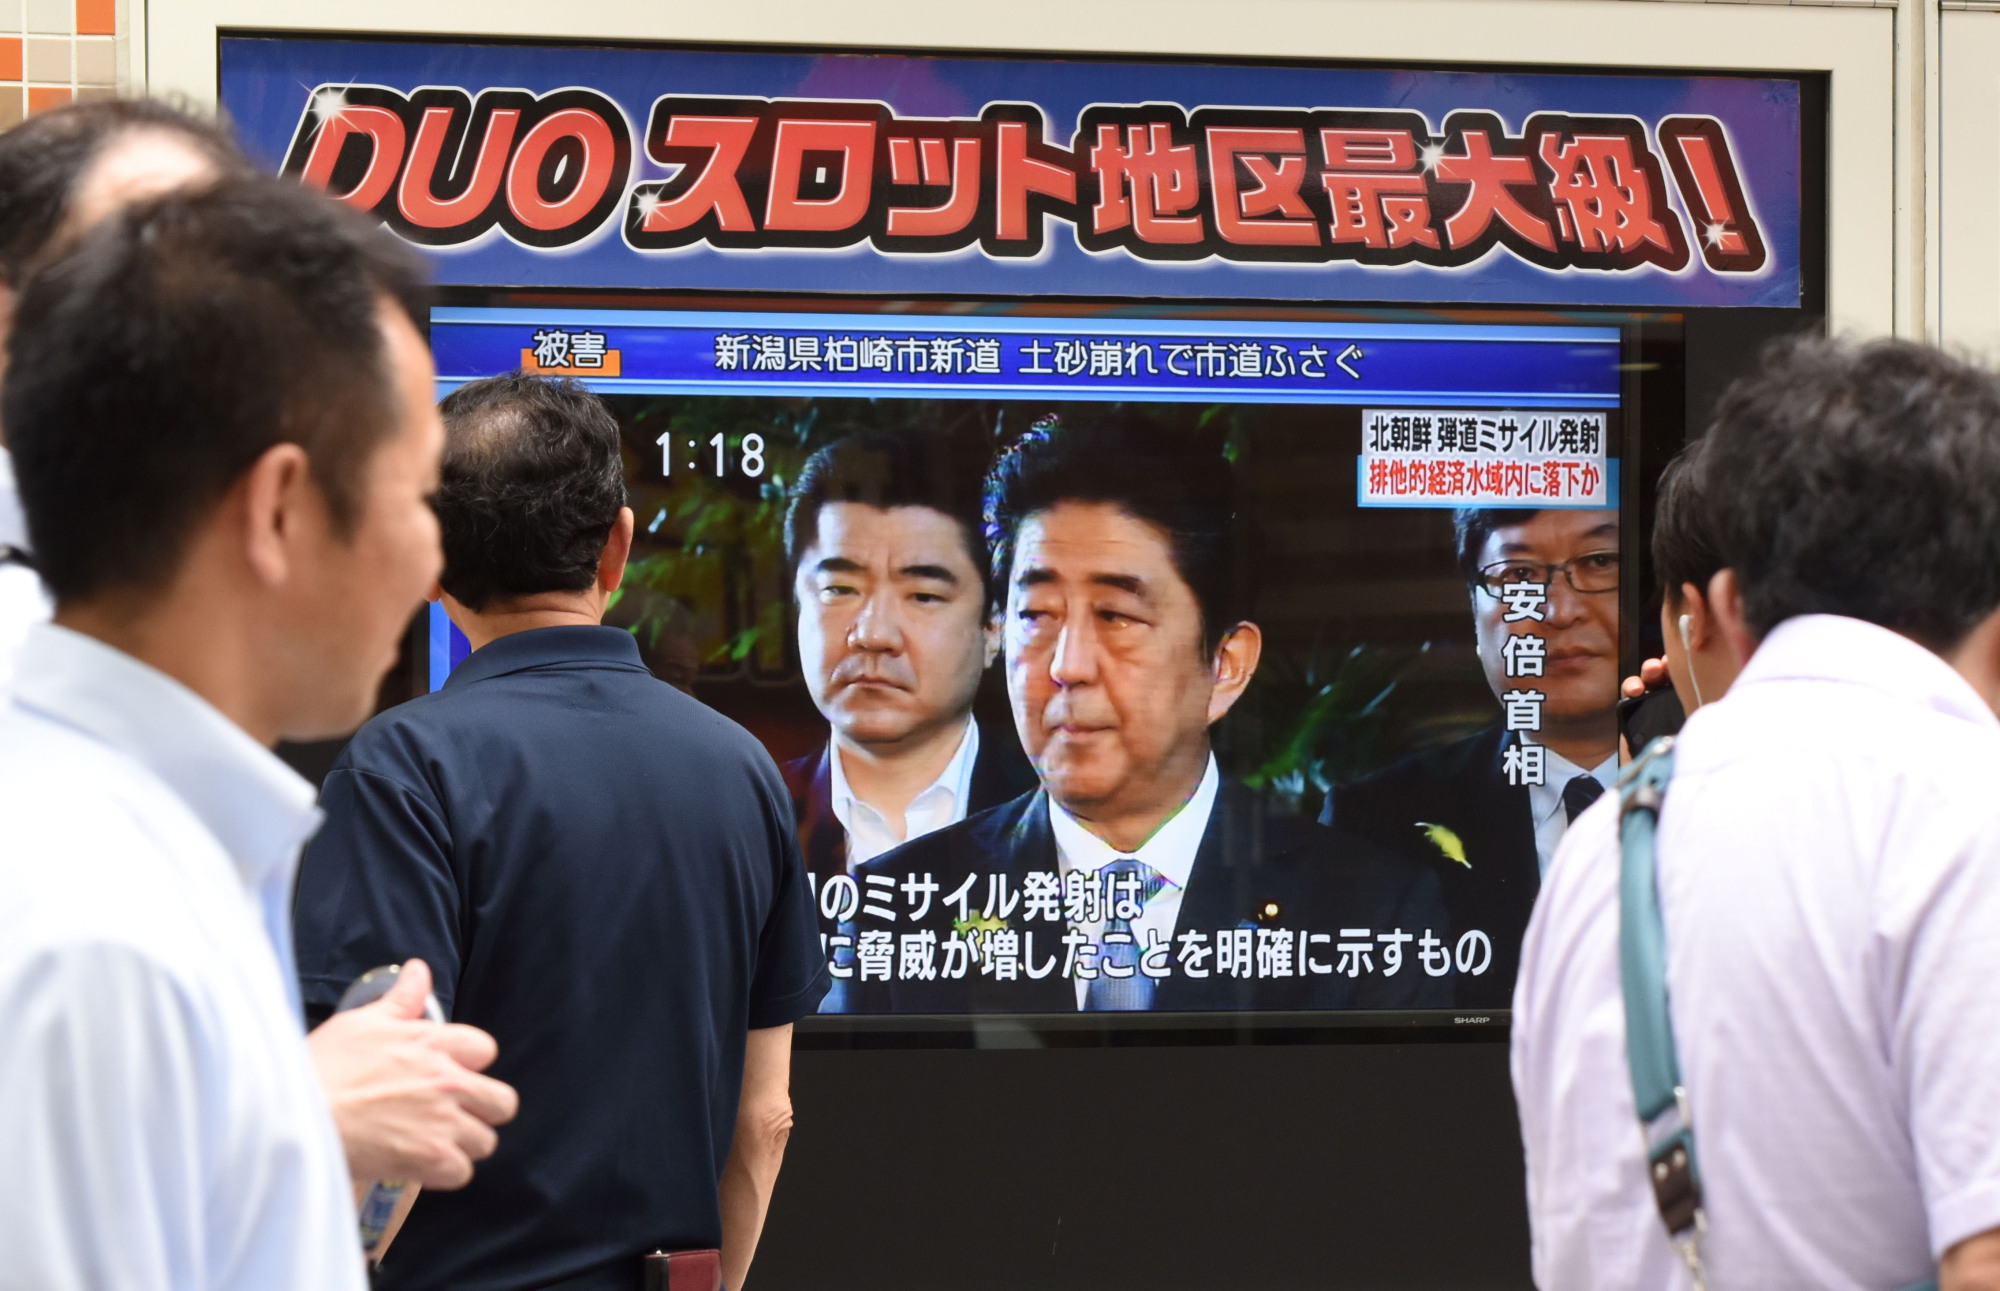 A television news broadcast shows Prime Minister Shinzo Abe addressing the media in Tokyo on Tuesday in response to North Korea's successful launch of a ballistic missile that day. | AFP-JIJI